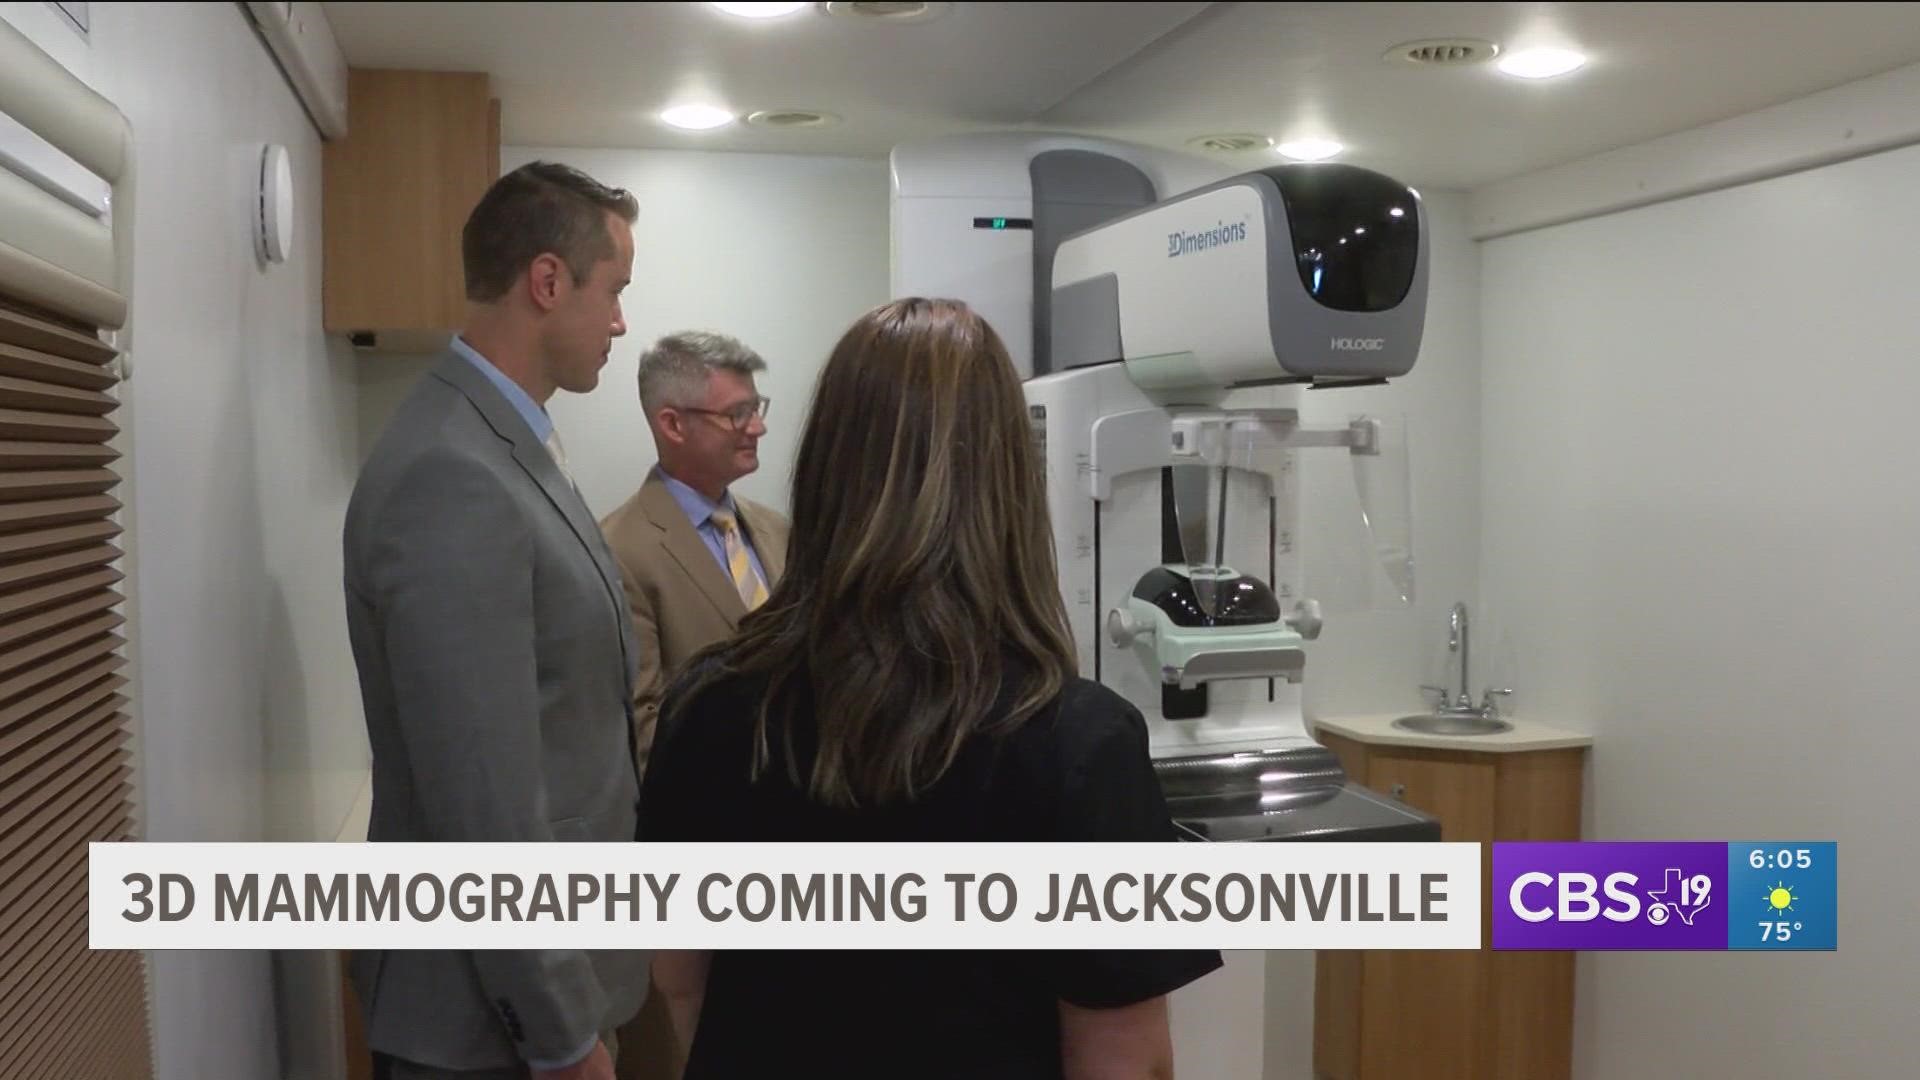 The new mammography unit will allow radiologists to see images in multiple layers and detect small cancers.